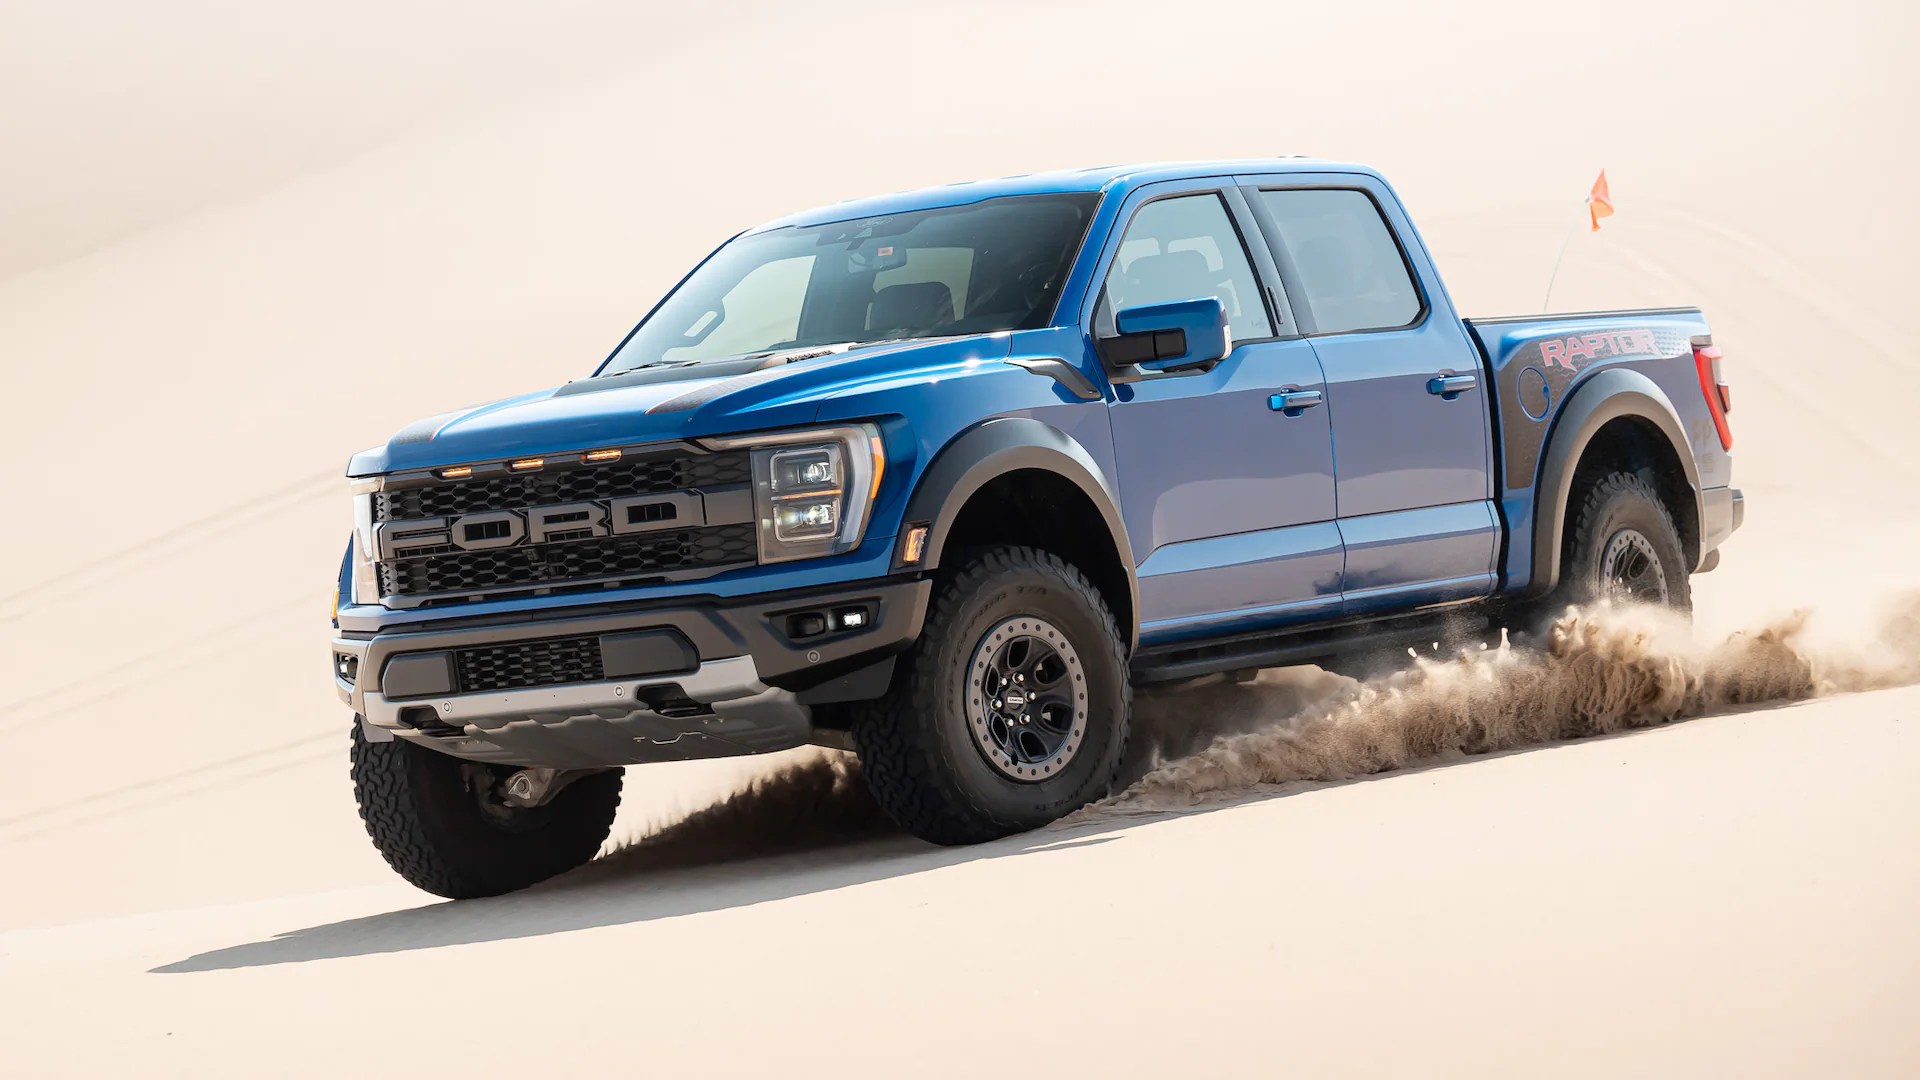 2021 Ford F-150 Raptor in the sand